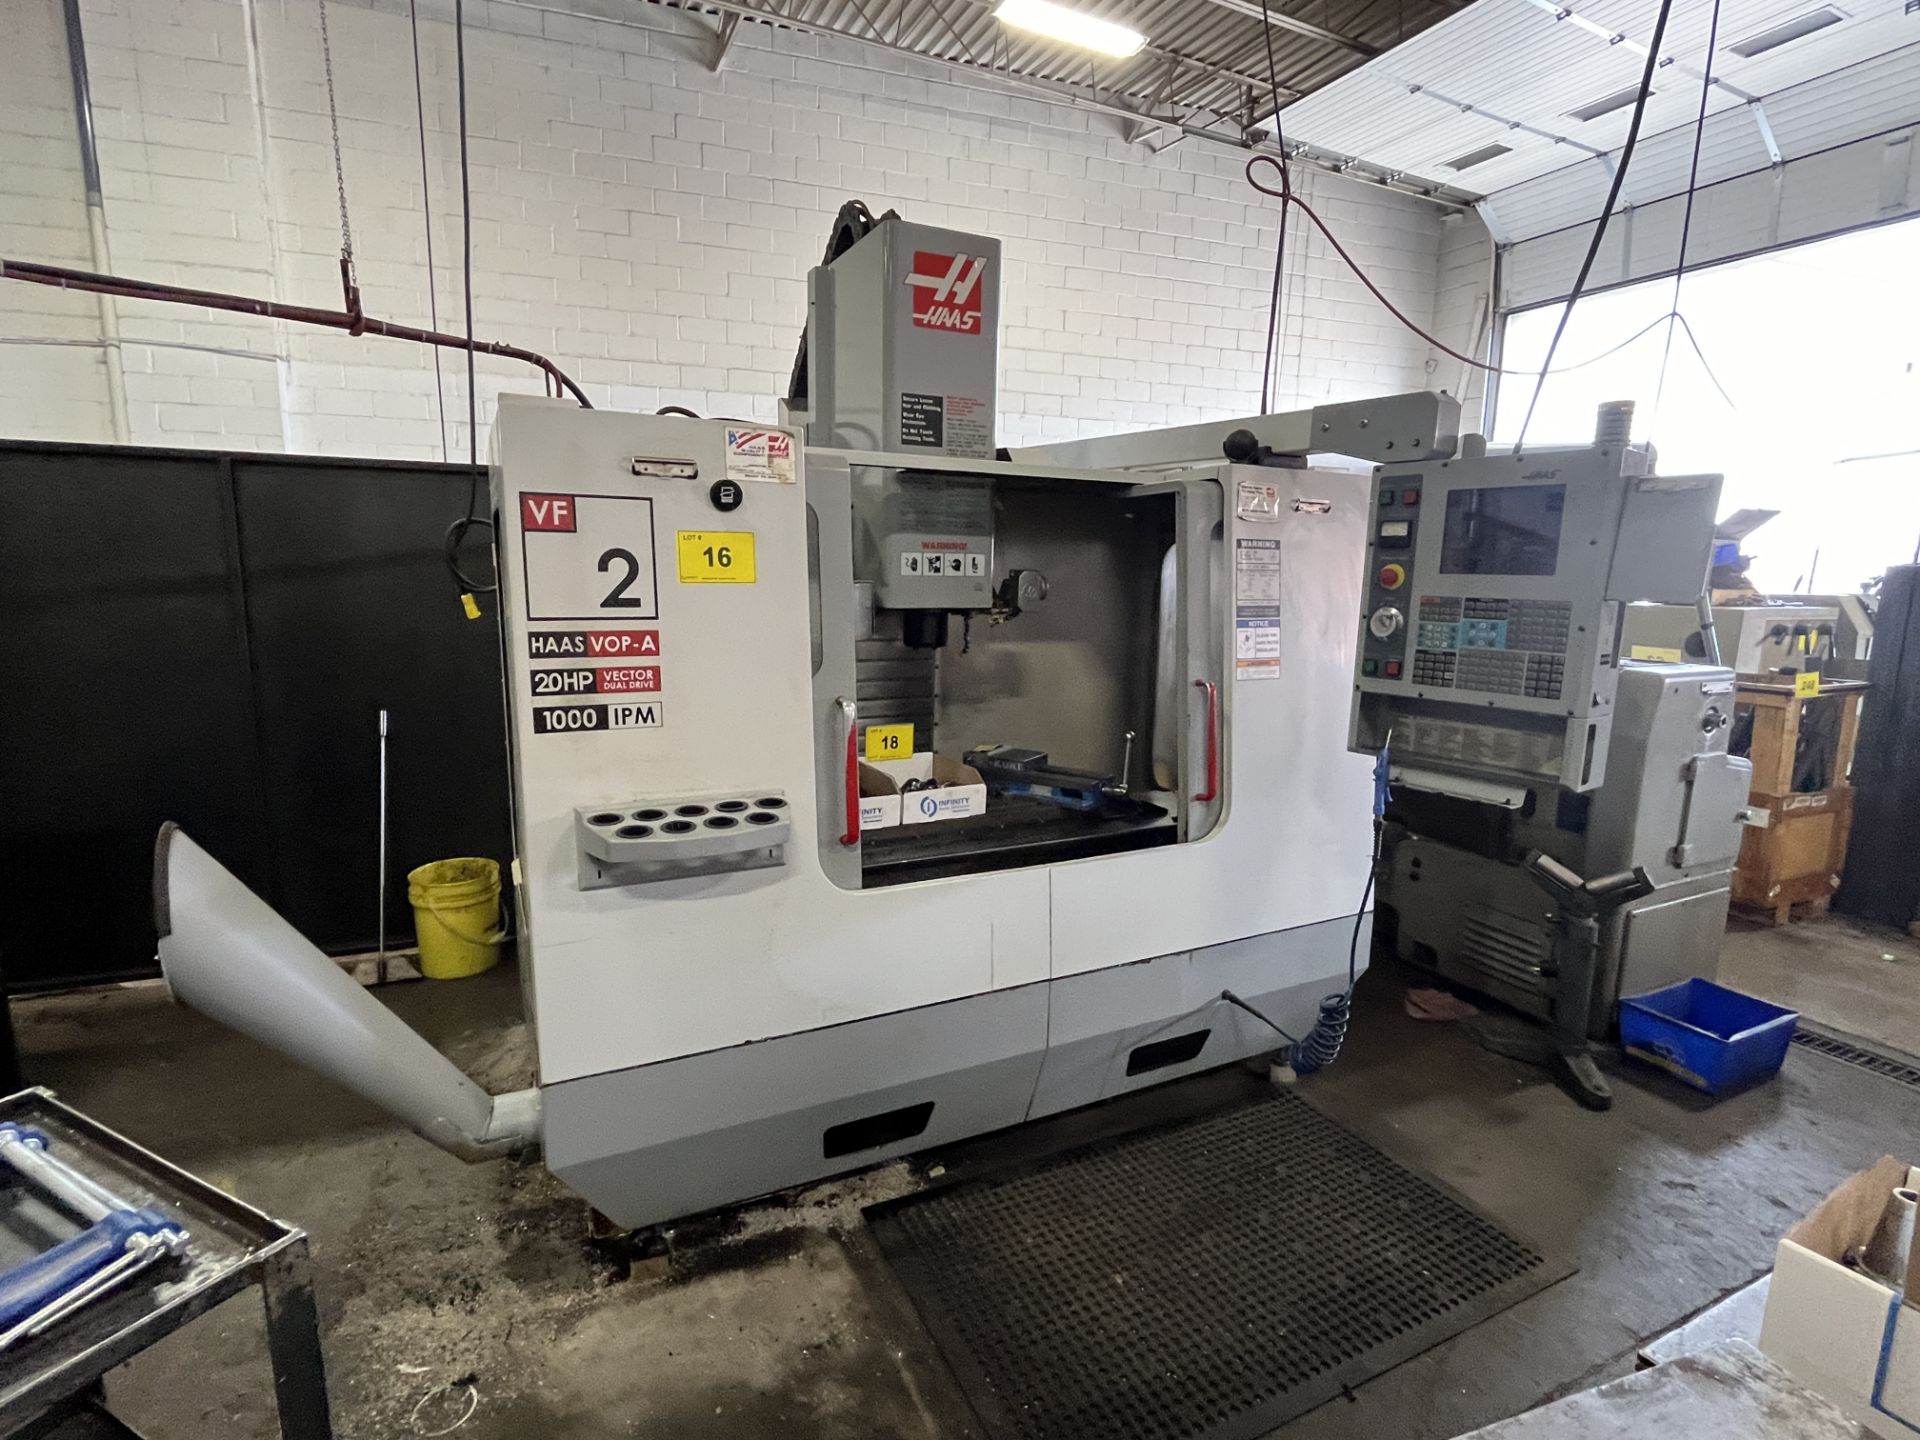 2004 HAAS VF2D CNC VERTICAL MACHINING CENTER, CNC CONTROL, TRAVELS: X-30”, Y-16”, Z-20”, 14” X 36” - Image 13 of 13